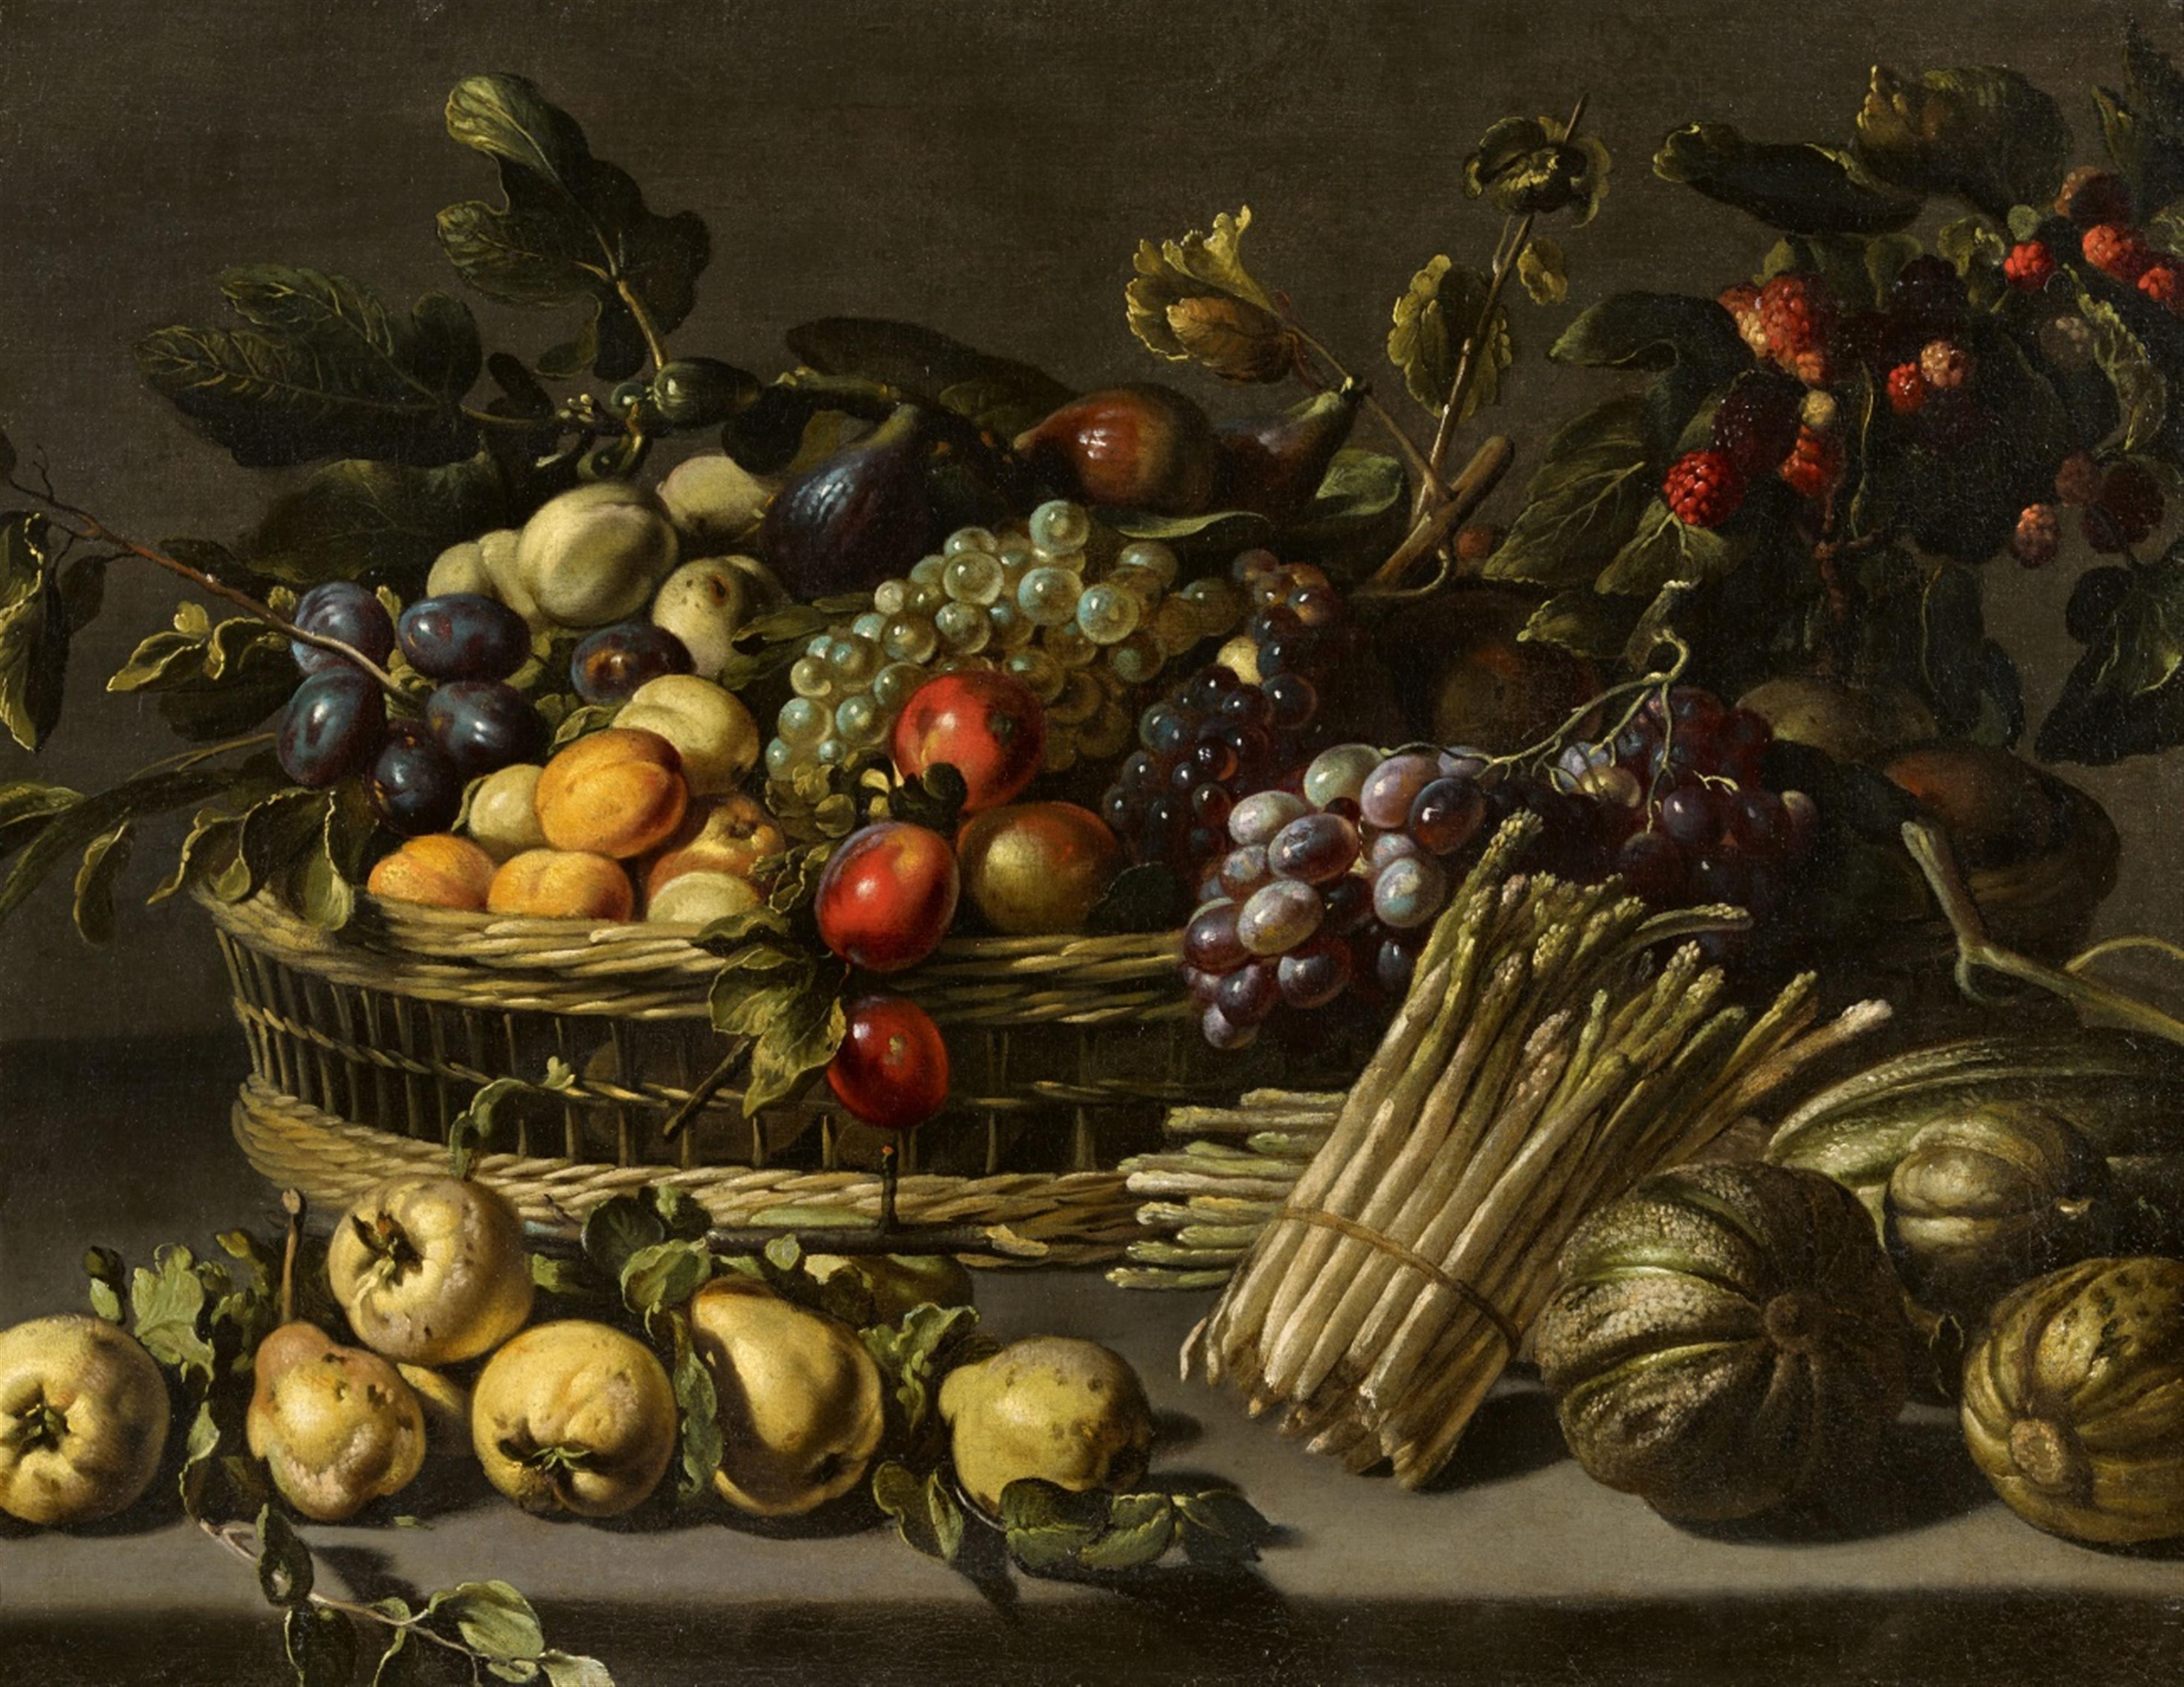 Adriaen van Utrecht, attributed to - Still Life with Fruit in a Basket surrounded by Melons, Quinces, and Asparagus - image-1